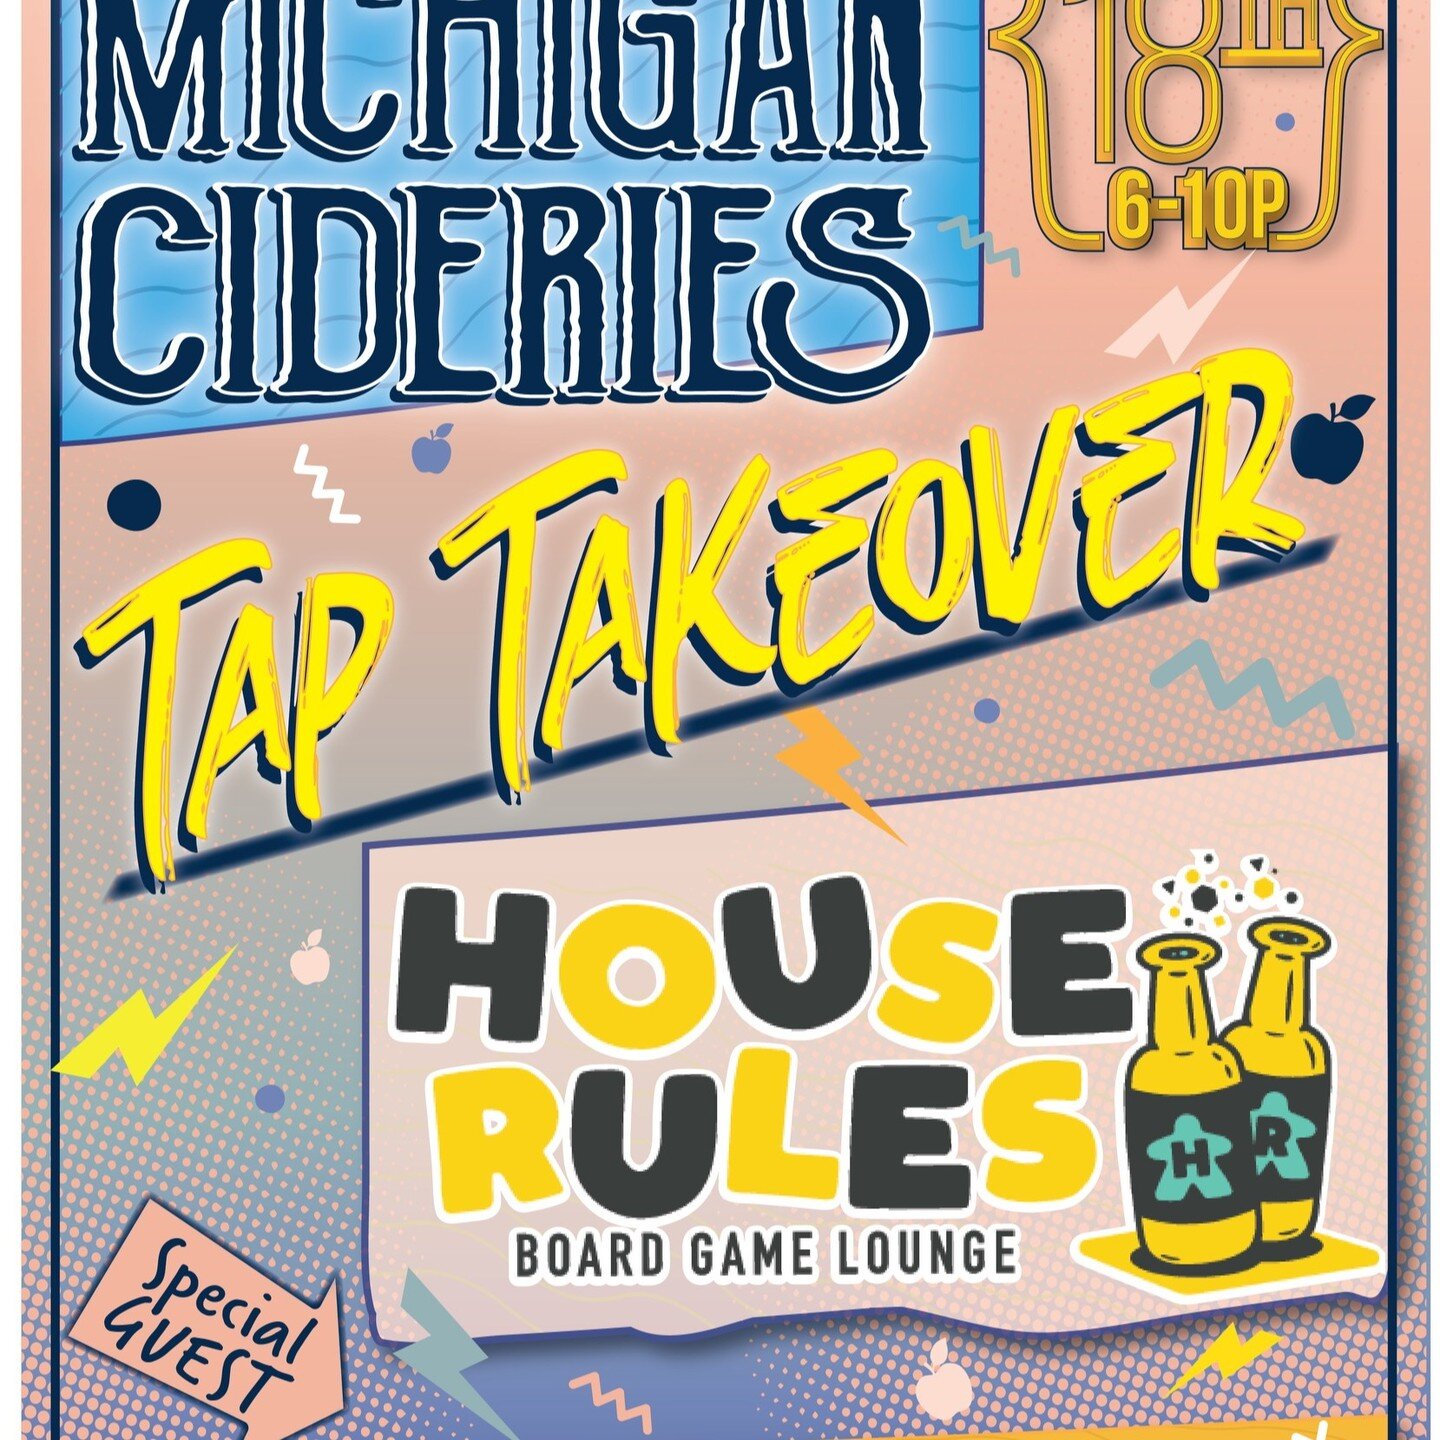 Anyone up for an AMAZING cider tap takeover? During the 2023 @glintcap in Grand Rapids, on May 18th from 6-10pm at @houseruleslounge 
Come check out this line up!!!!
@tandemciders 
@pifcider 
@beewellmeadery 
@twokfarms 
@starcutciders 
@townlinecide